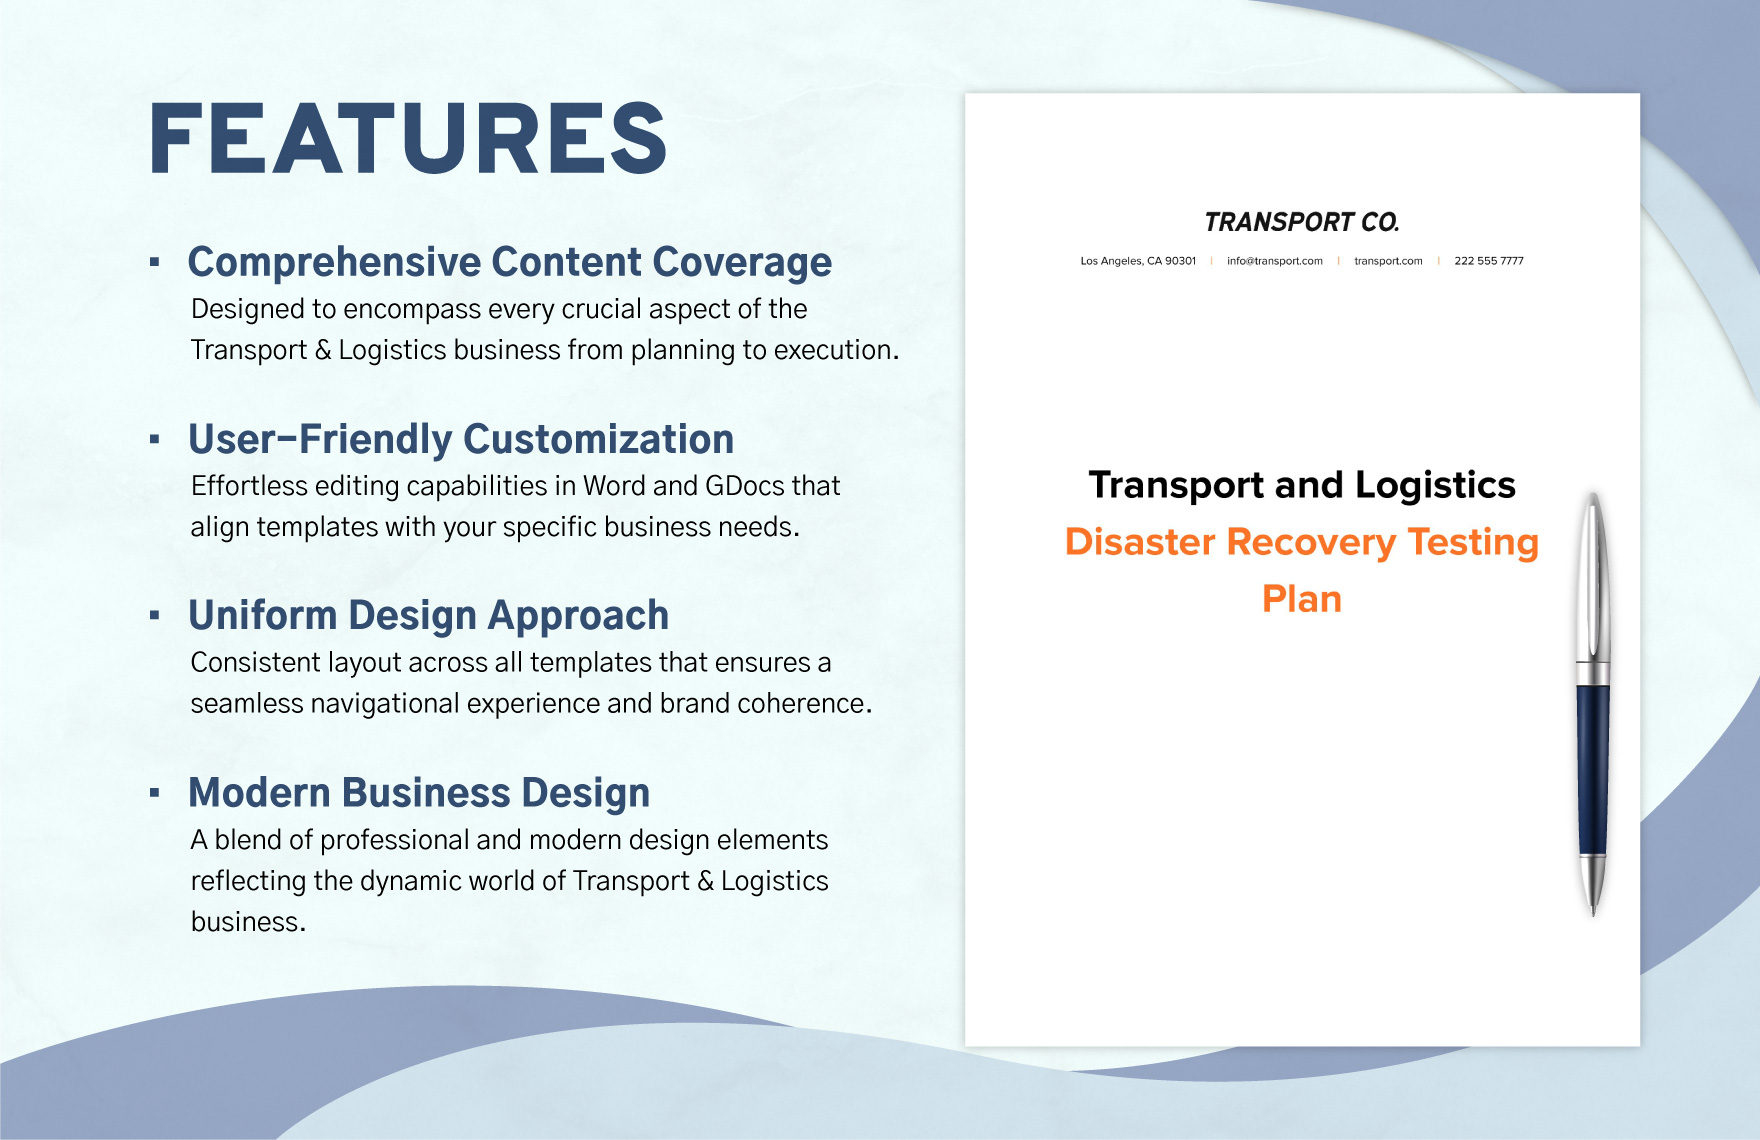 Transport and Logistics Disaster Recovery Testing Plan Template